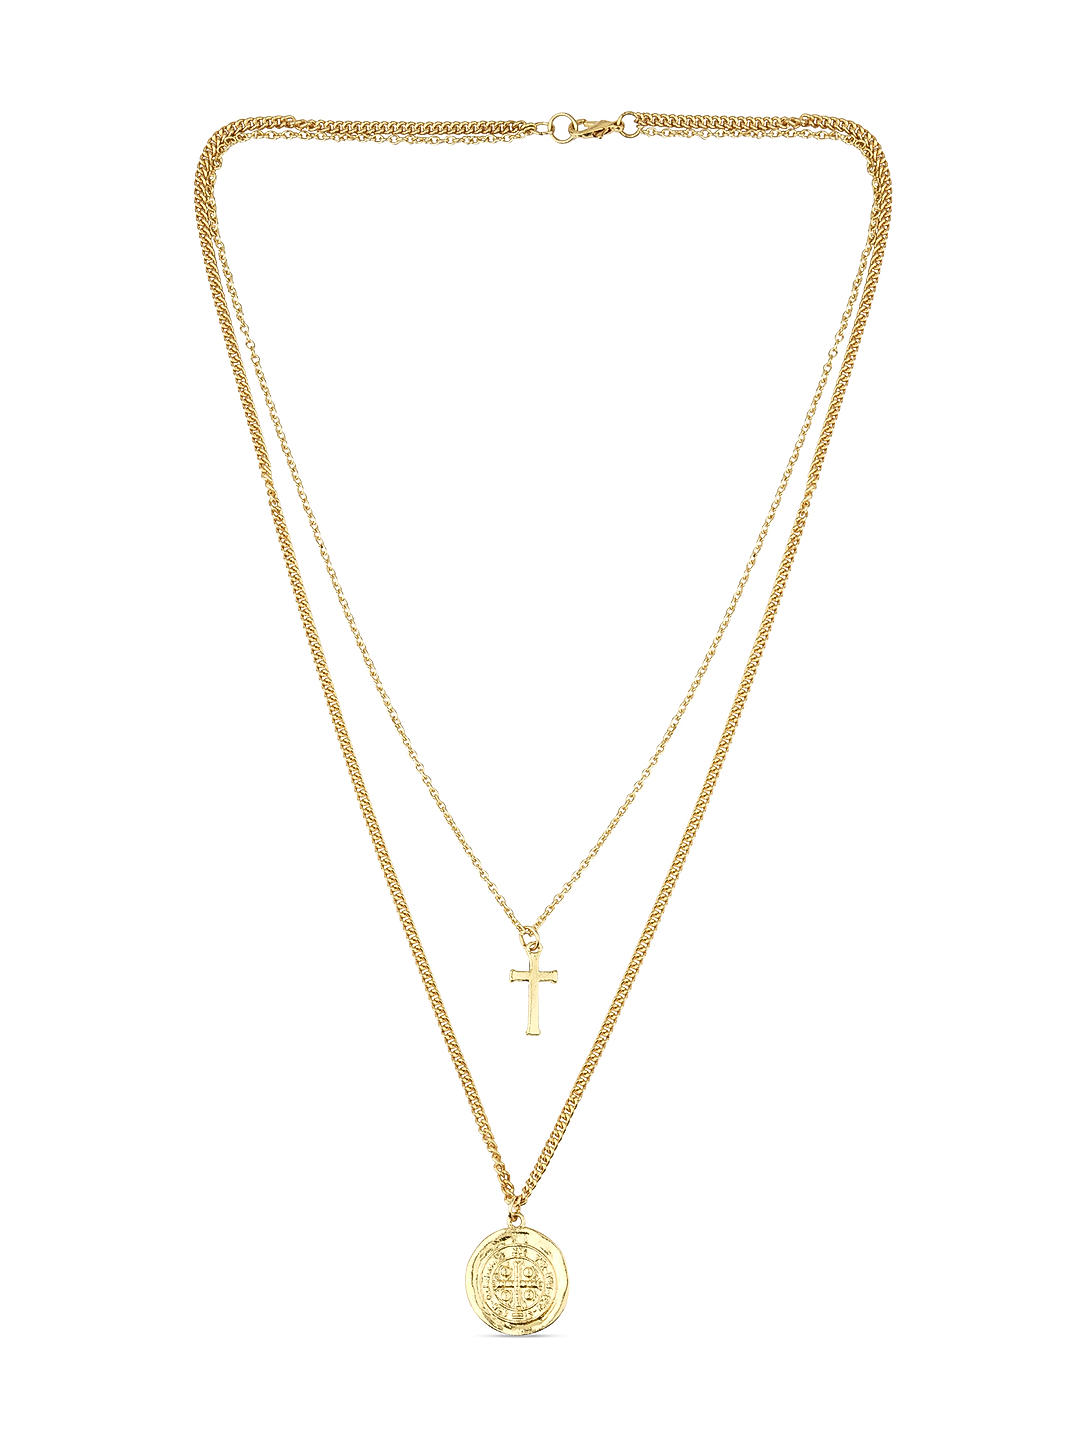 Buy Gold Plated Layered Charm Men Necklace@ Best Price